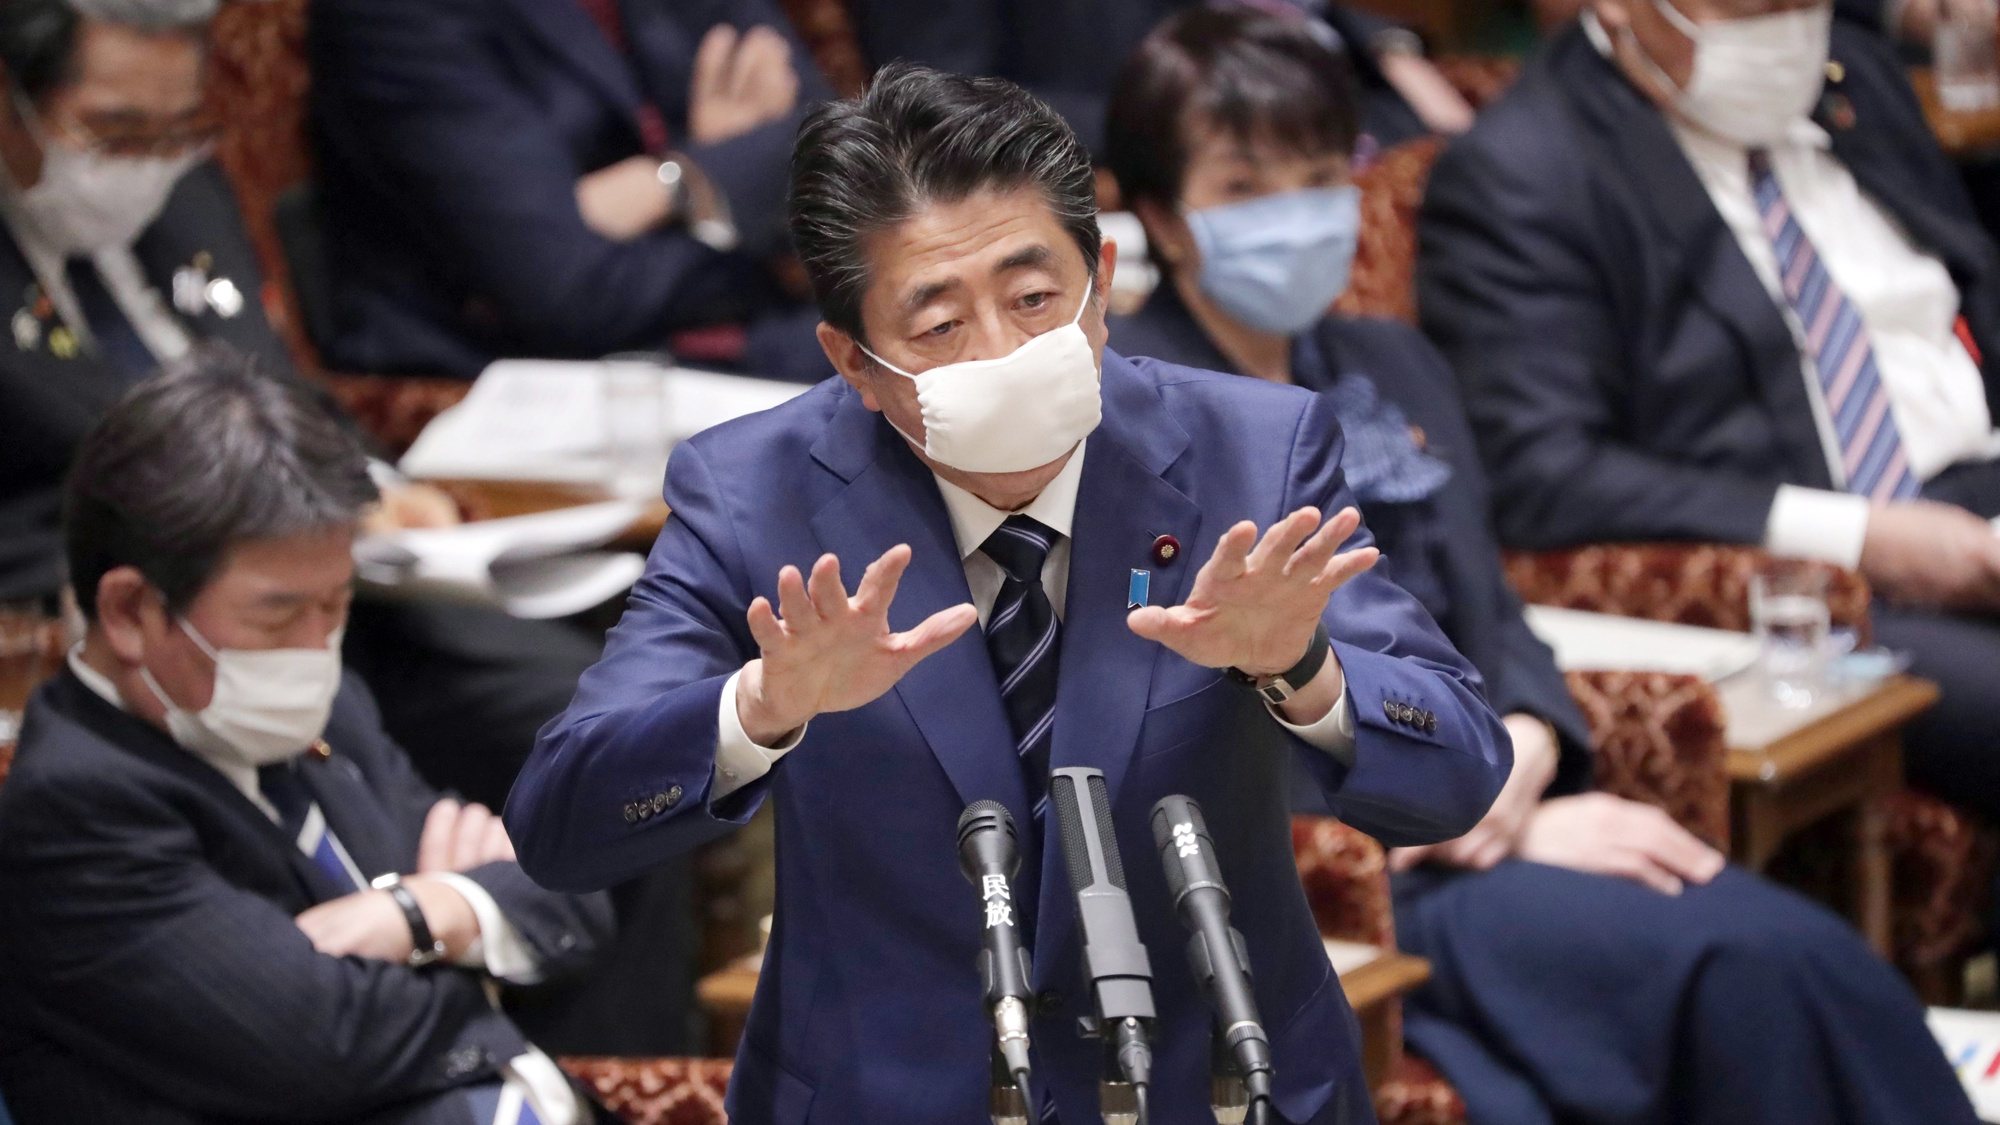 epa08335999 Wearing a mask, Japanese Prime Minister Shinzo Abe speaks during an Upper House Accounts Committee meeting in Tokyo, Japan, 01 April 2020. According to reports, on 31 March, Tokyo has a total number of cases exceeding 500. Calls are rising for Prime Minister Shinzo Abe to declare state of emergency.  EPA/JIJI PRESS JAPAN OUT  EDITORIAL USE ONLY/NO SALES/NO ARCHIVES